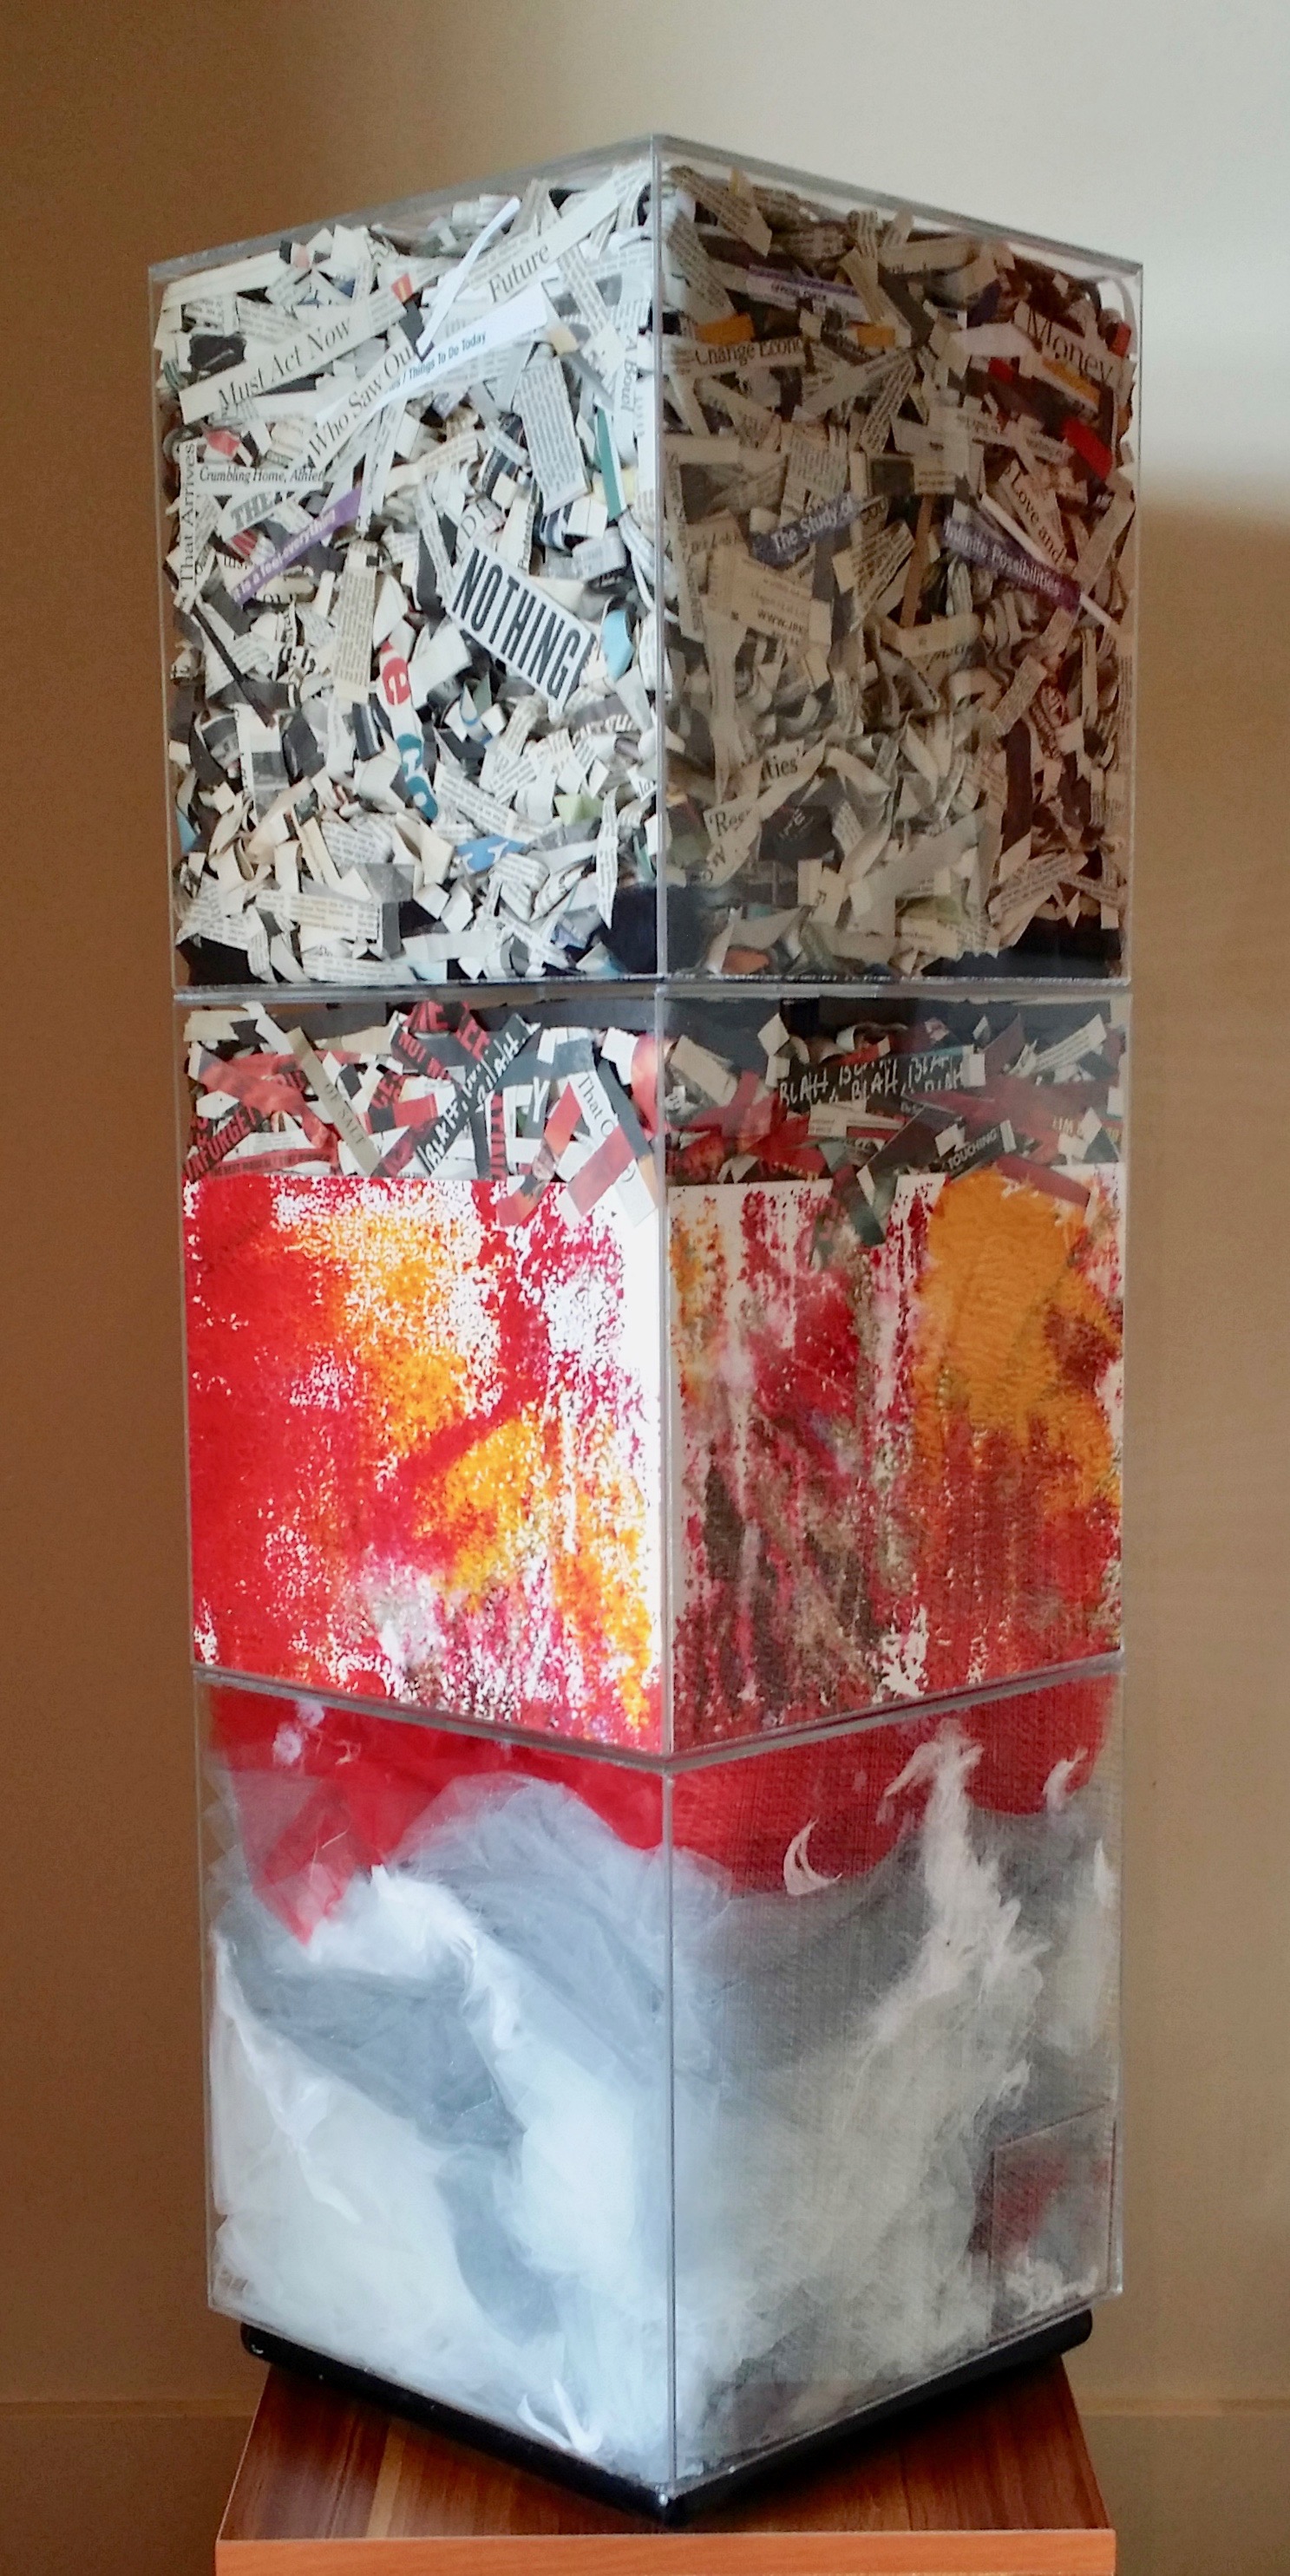  An Hypothesis, 2015 Installation 38 x 12.5 x 12.5 inches  Three acrylic cubes containing newspaper clippings, paintings, fabric 